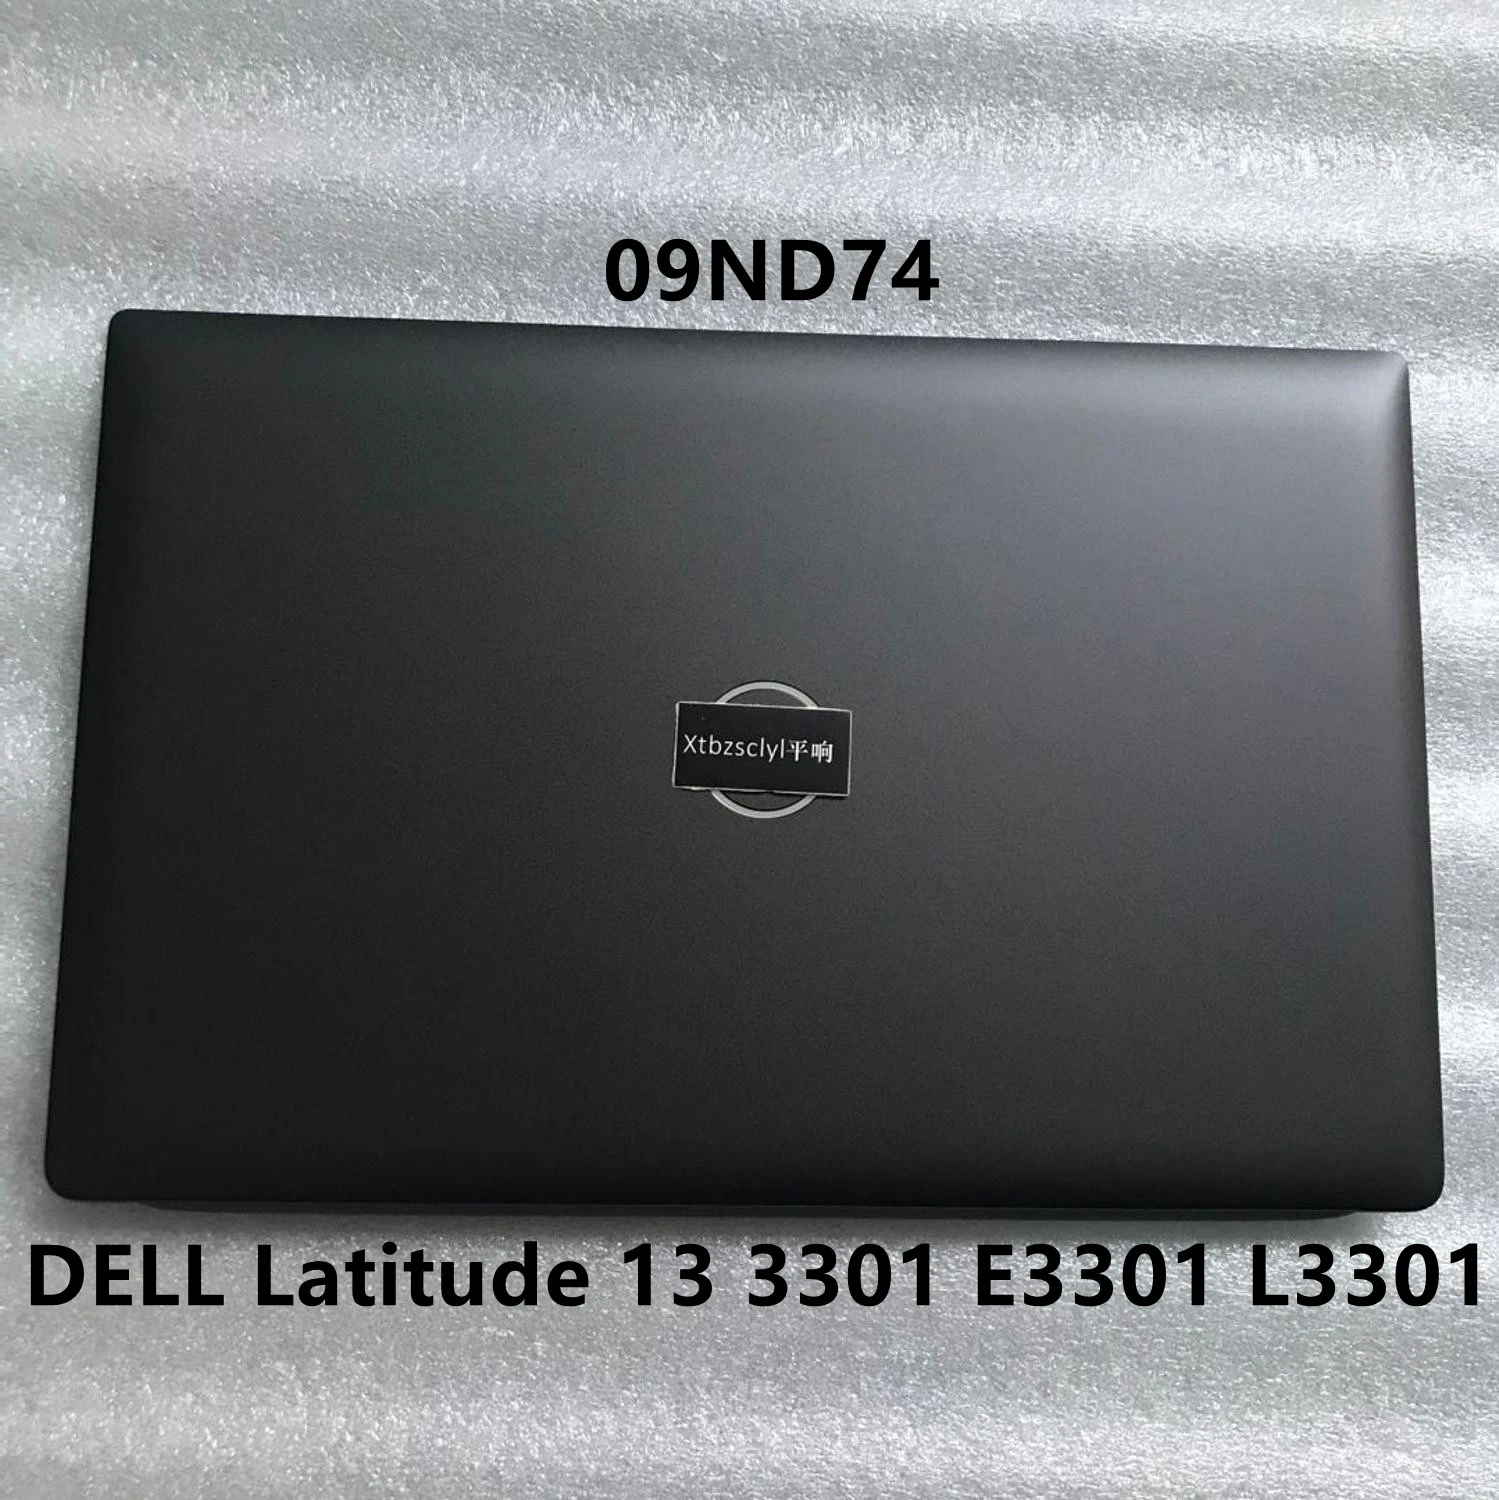 New For DELL Latitude 13 3301 E3301 L3301 screen back cover laptop A shell  black 09ND74 9ND74|Laptop Bags & Cases| - AliExpress